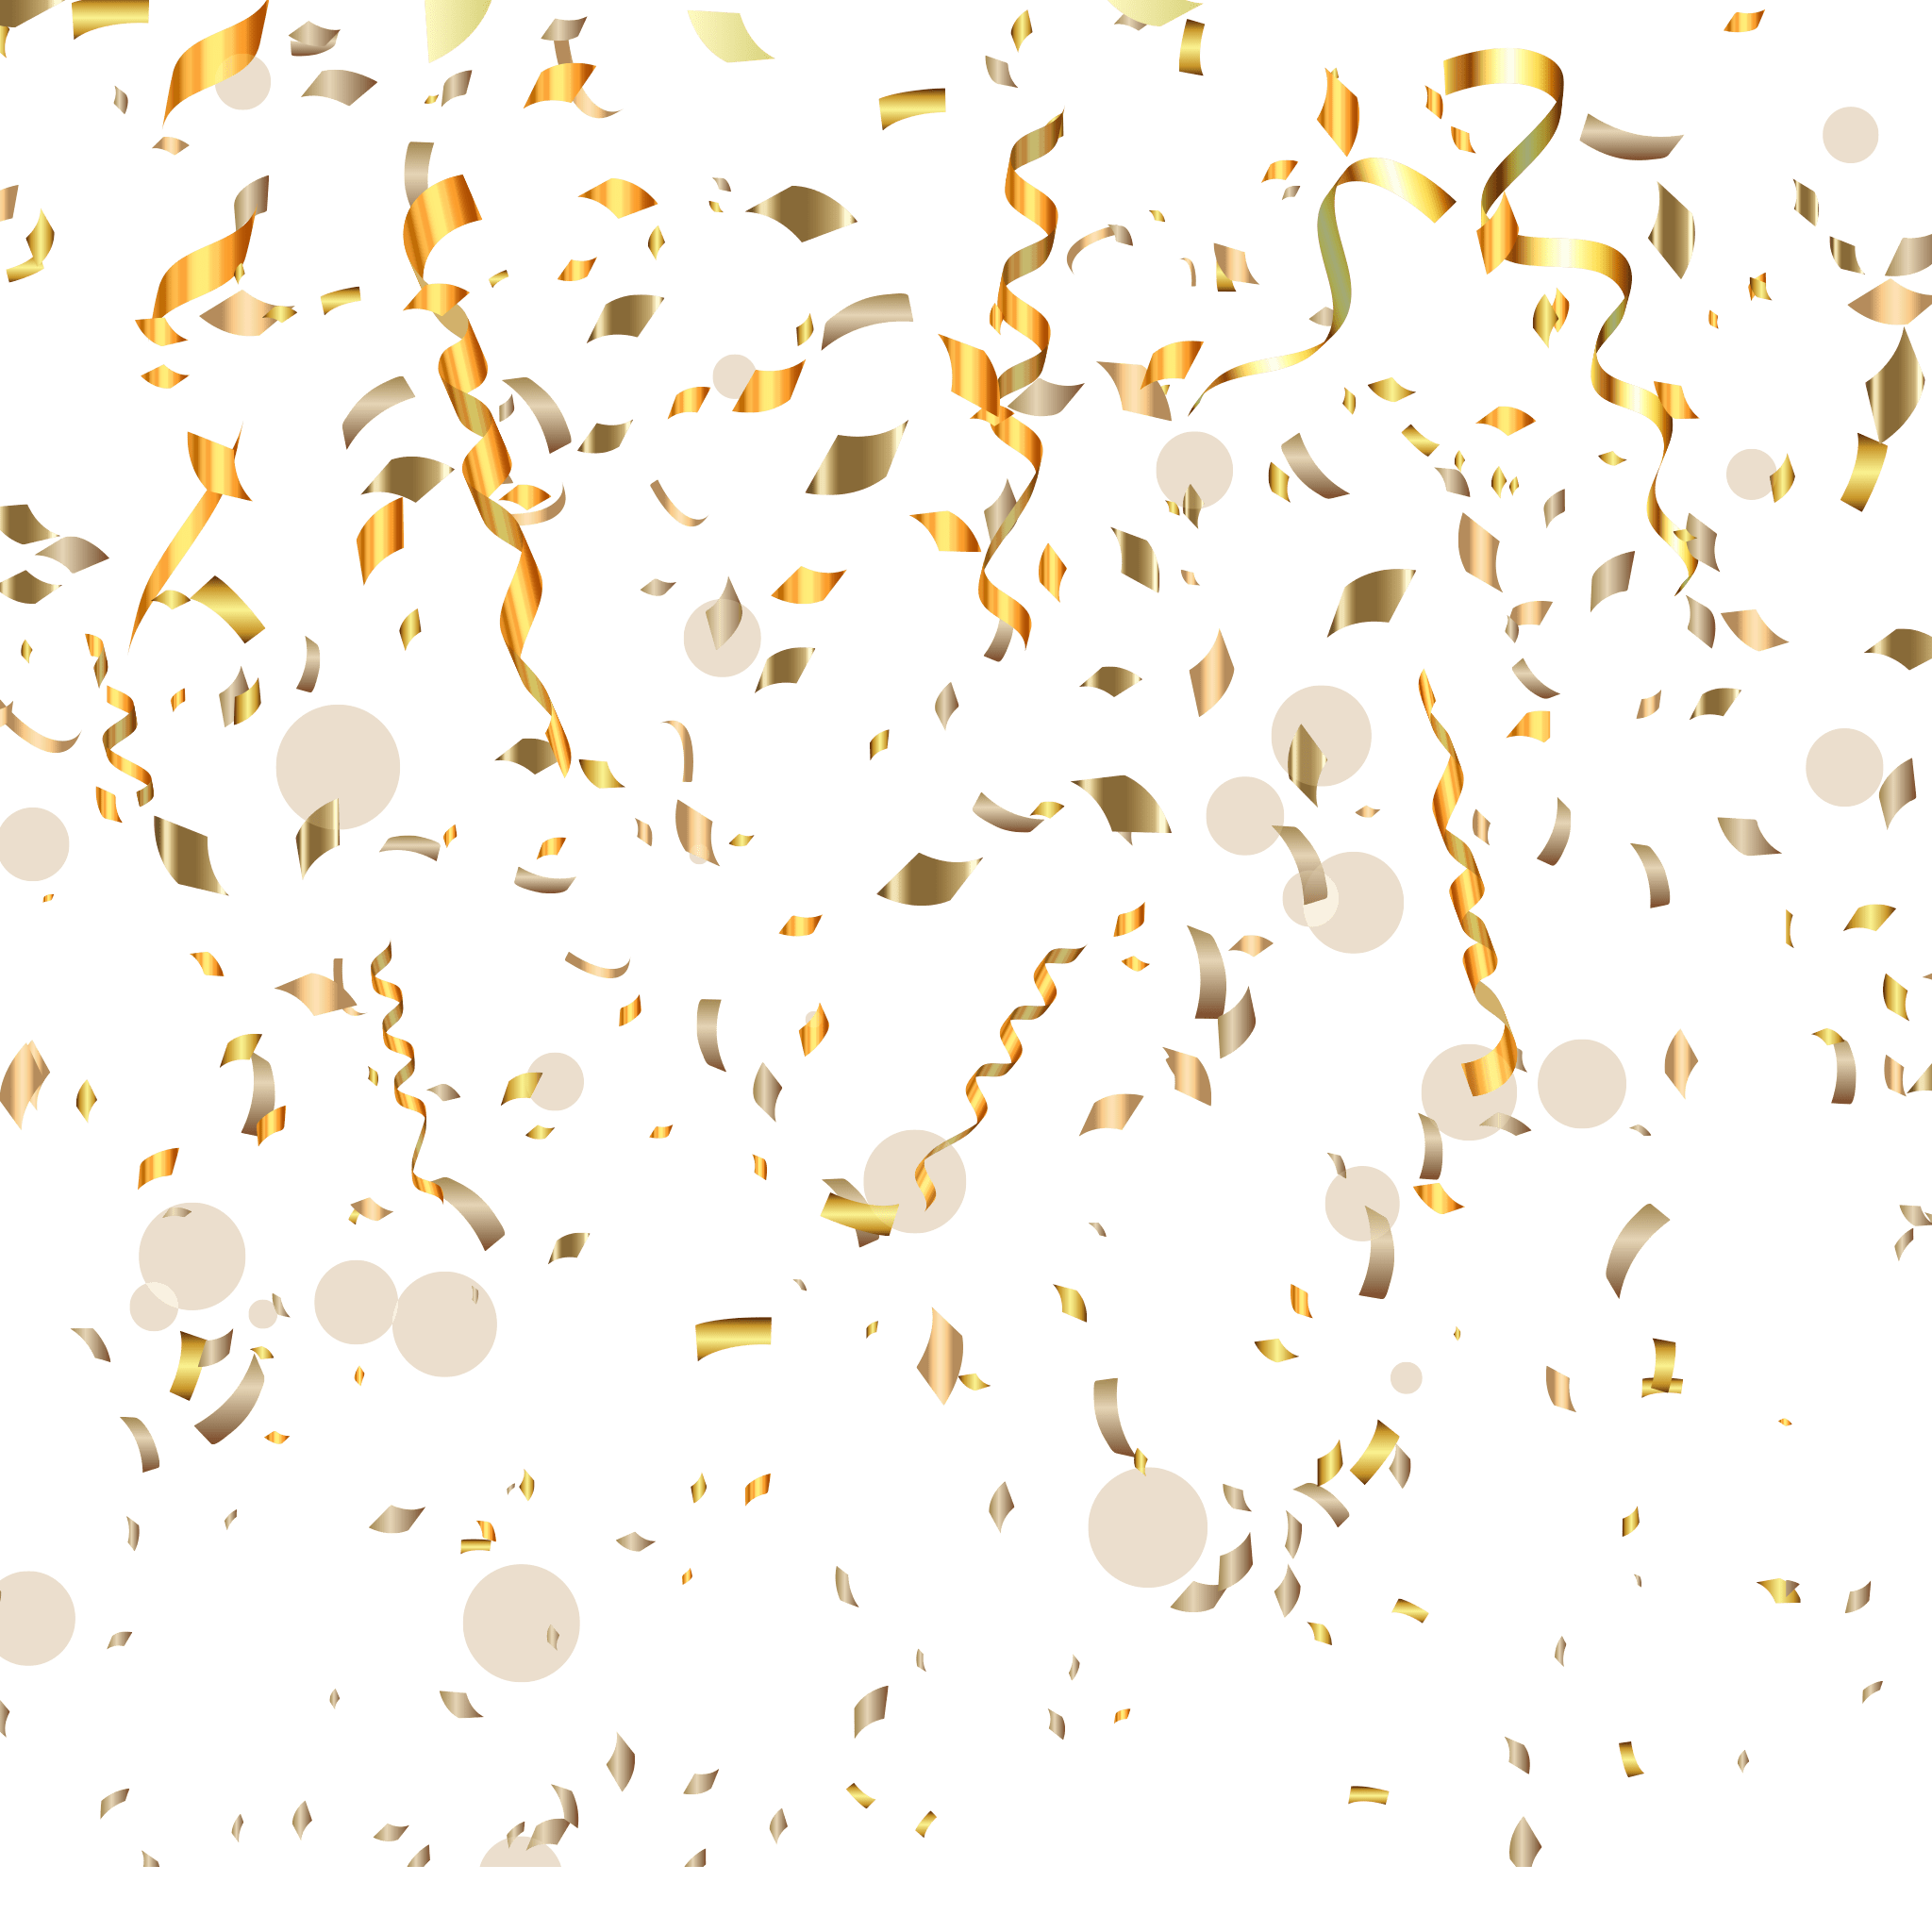 Confetti Photos, Download The BEST Free Confetti Stock Photos & HD Images